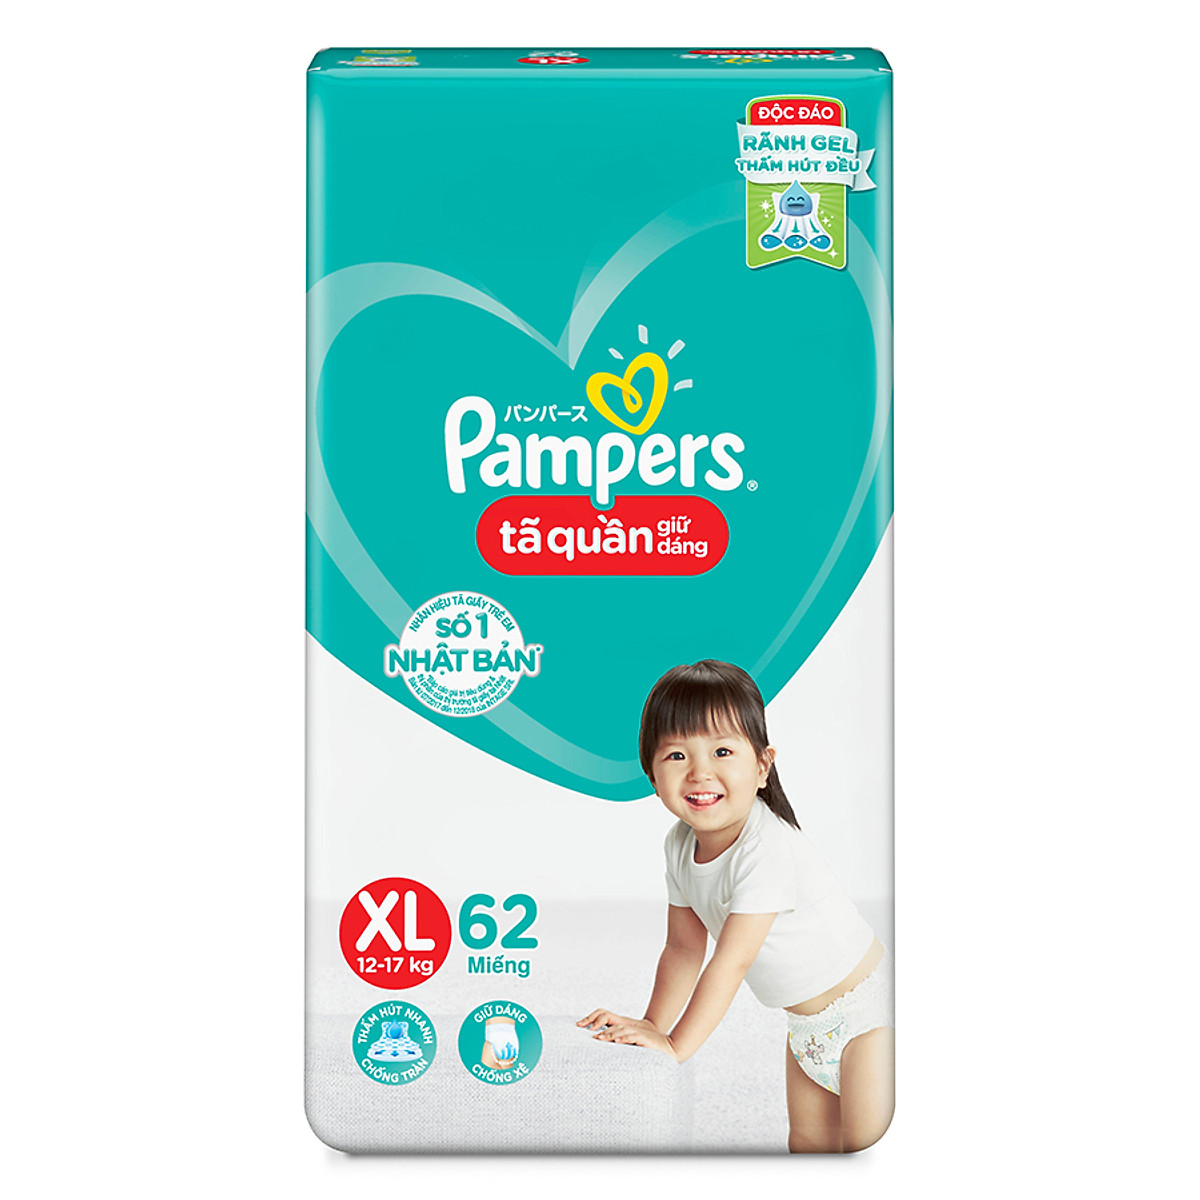 Buy PAMPERS NEW DIAPER SIZE XL PACKET OF 20 Online & Get Upto 60% OFF at  PharmEasy